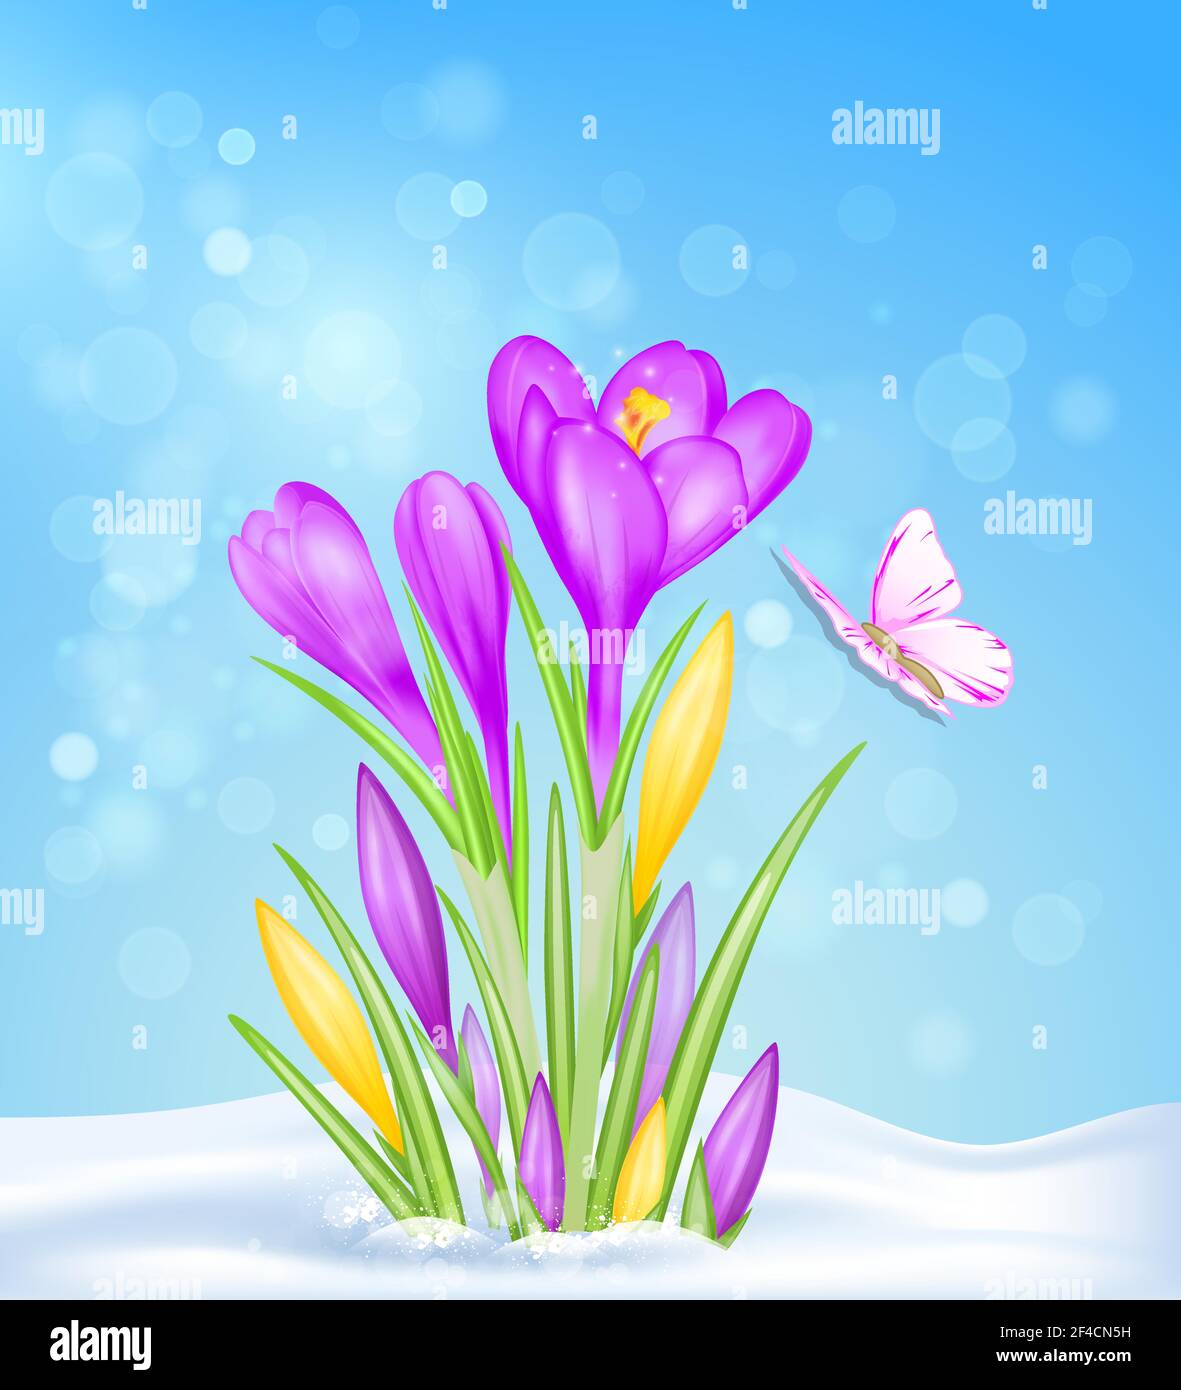 Purple and yellow crocus flowers in the snow. Spring floral background. Vector illustration. Stock Vector